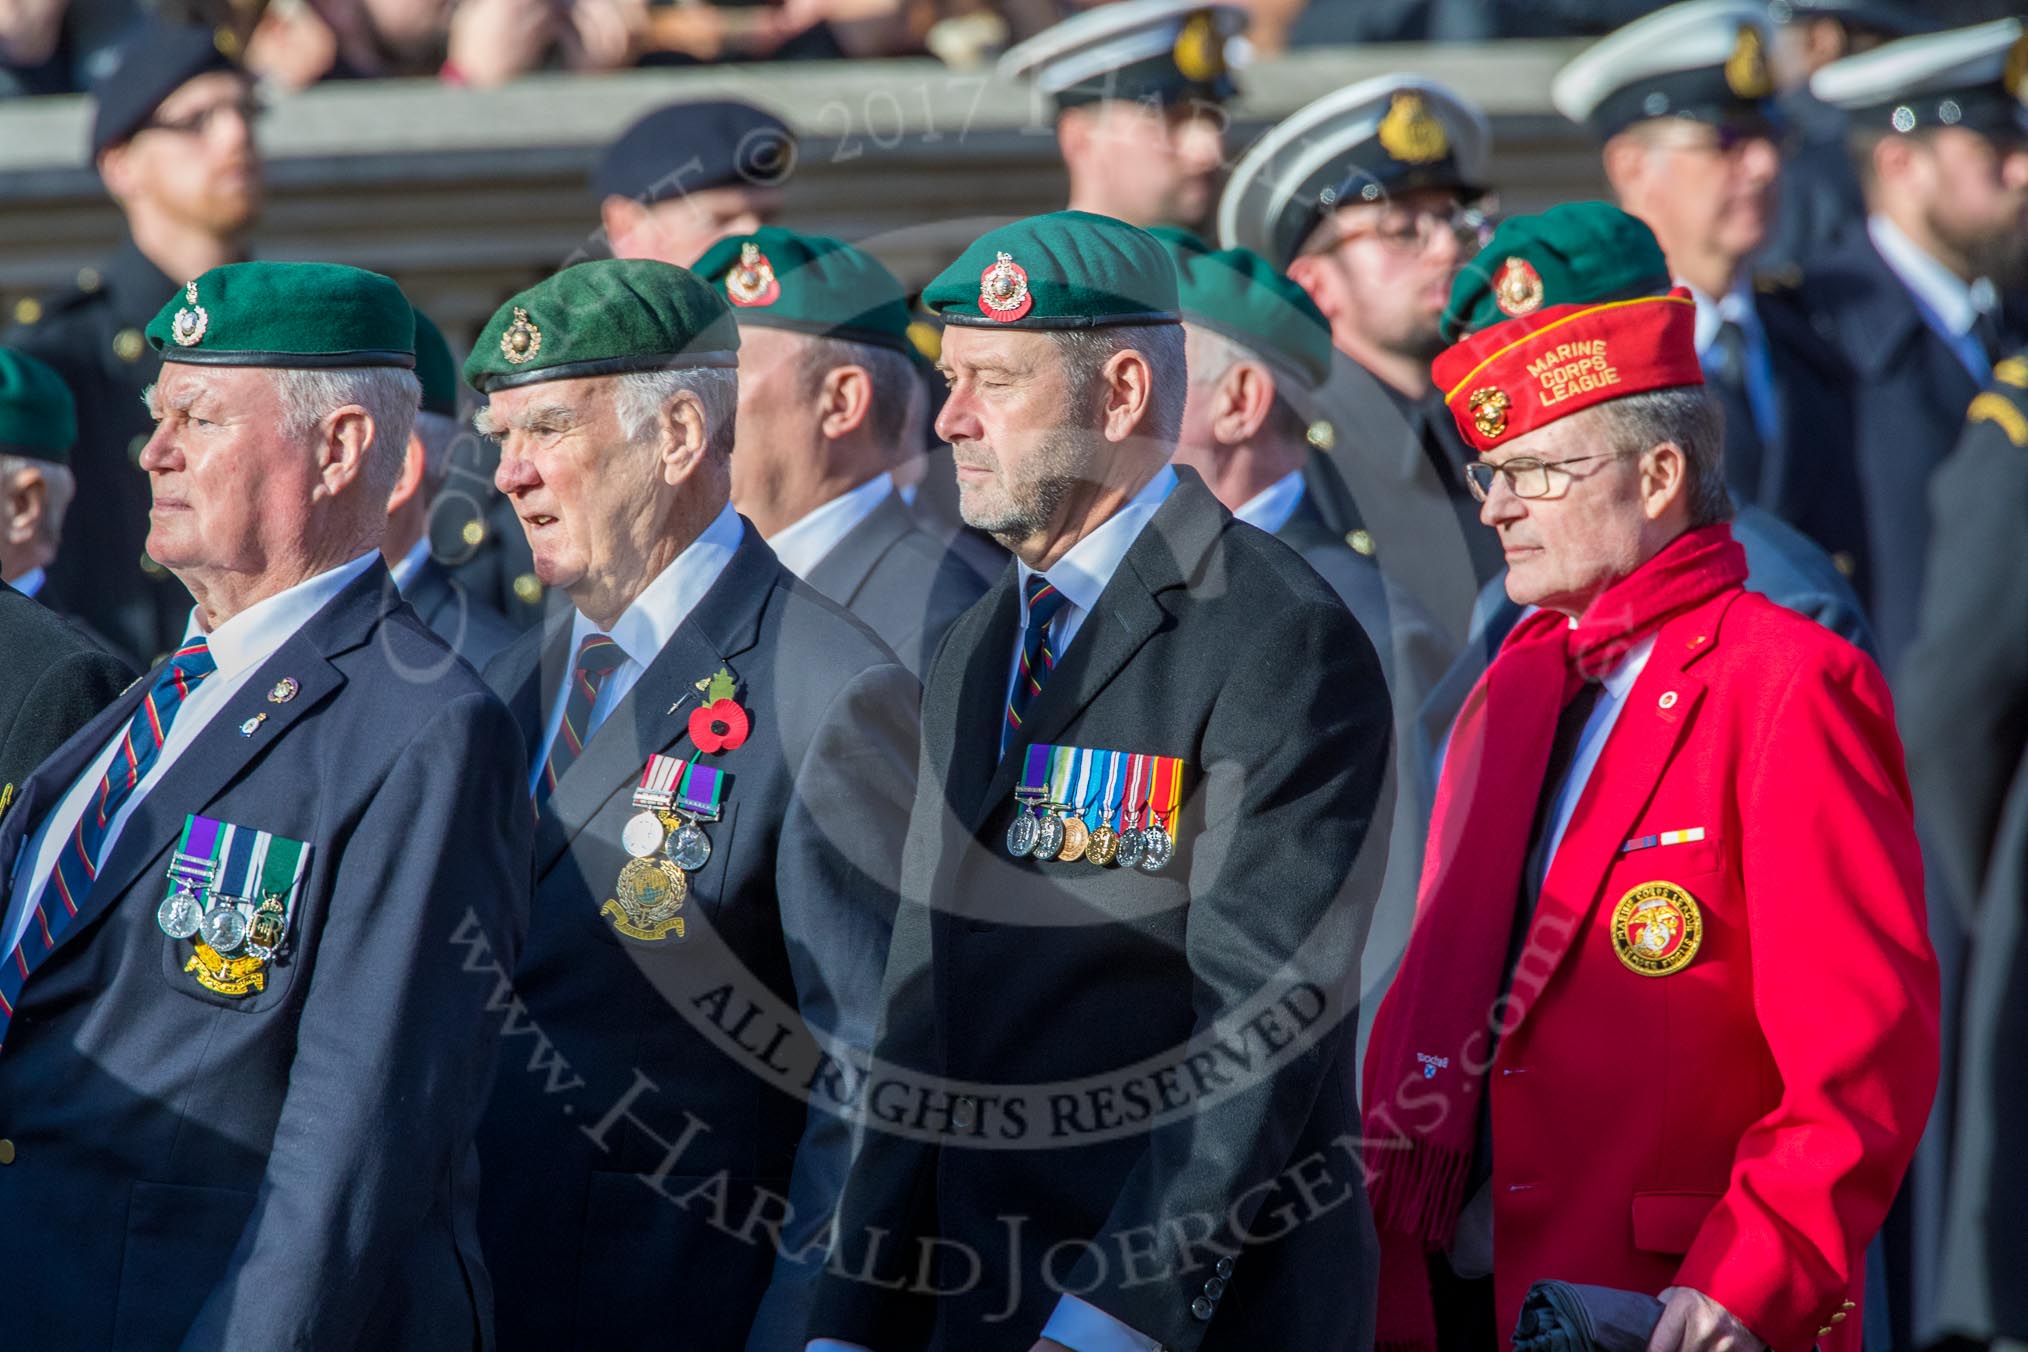 The Royal Marines Association  (Group E2, 59 members)during the Royal British Legion March Past on Remembrance Sunday at the Cenotaph, Whitehall, Westminster, London, 11 November 2018, 11:41.